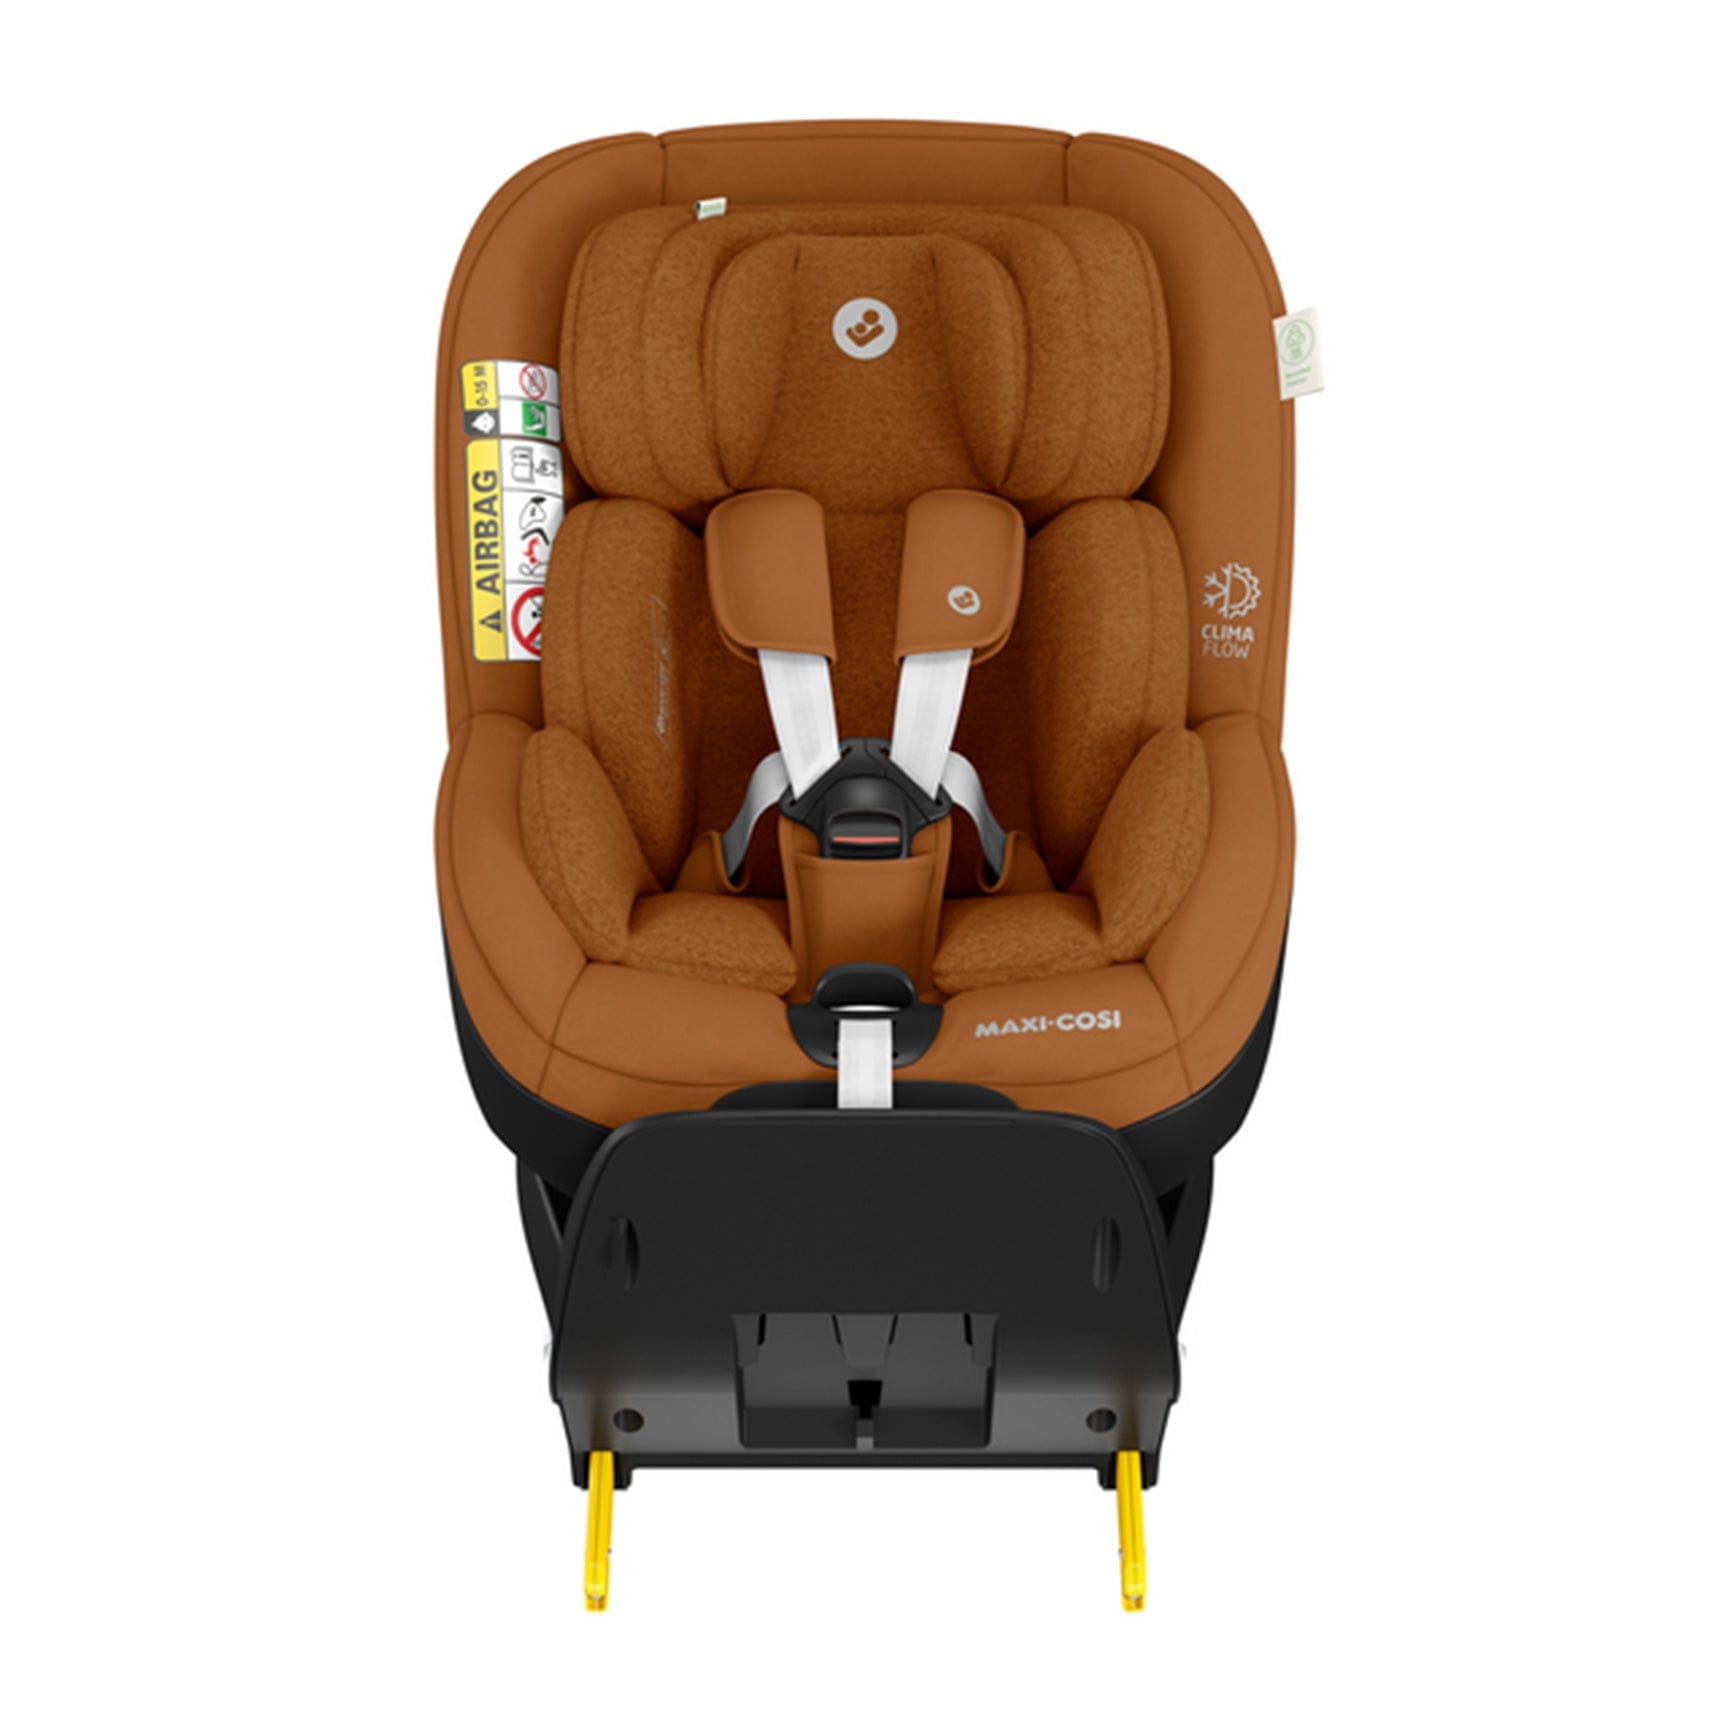 The Maxi-Cosi Mica Pro Eco i-Size🌱, Maxi-Cosi's first sustainable car  seat is here! 🌱 The Maxi-Cosi Mica Pro Eco i-Size is perfect for  eco-conscious parents. Made from 100% recycled fabric